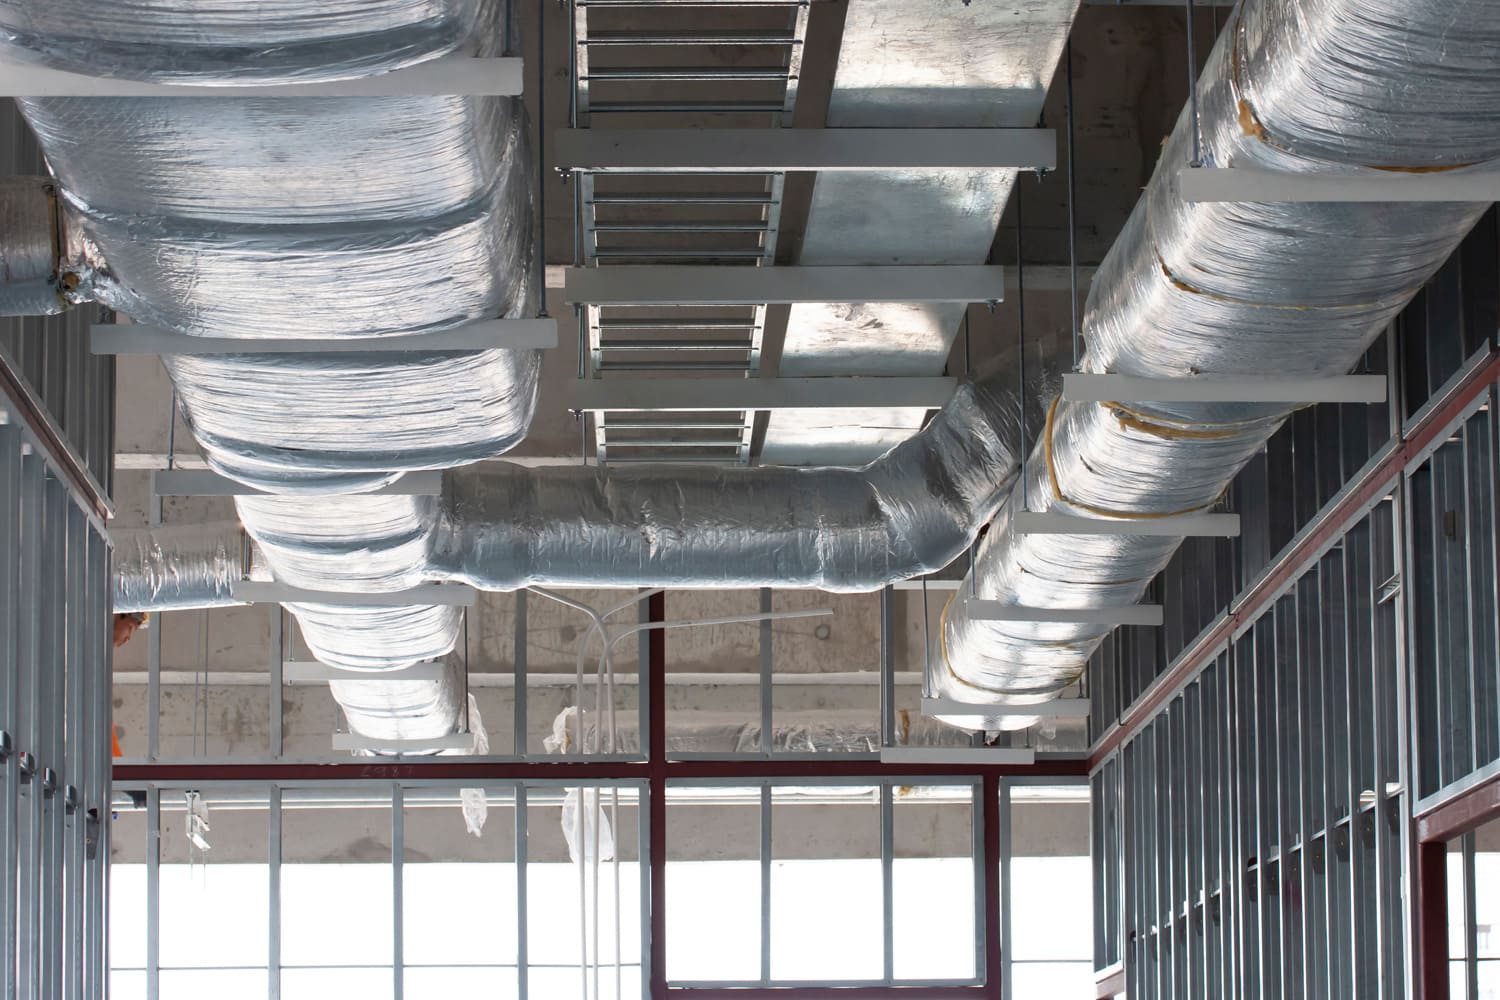 Typical installation of ducting with fiberglass insulation work combine with cable tray